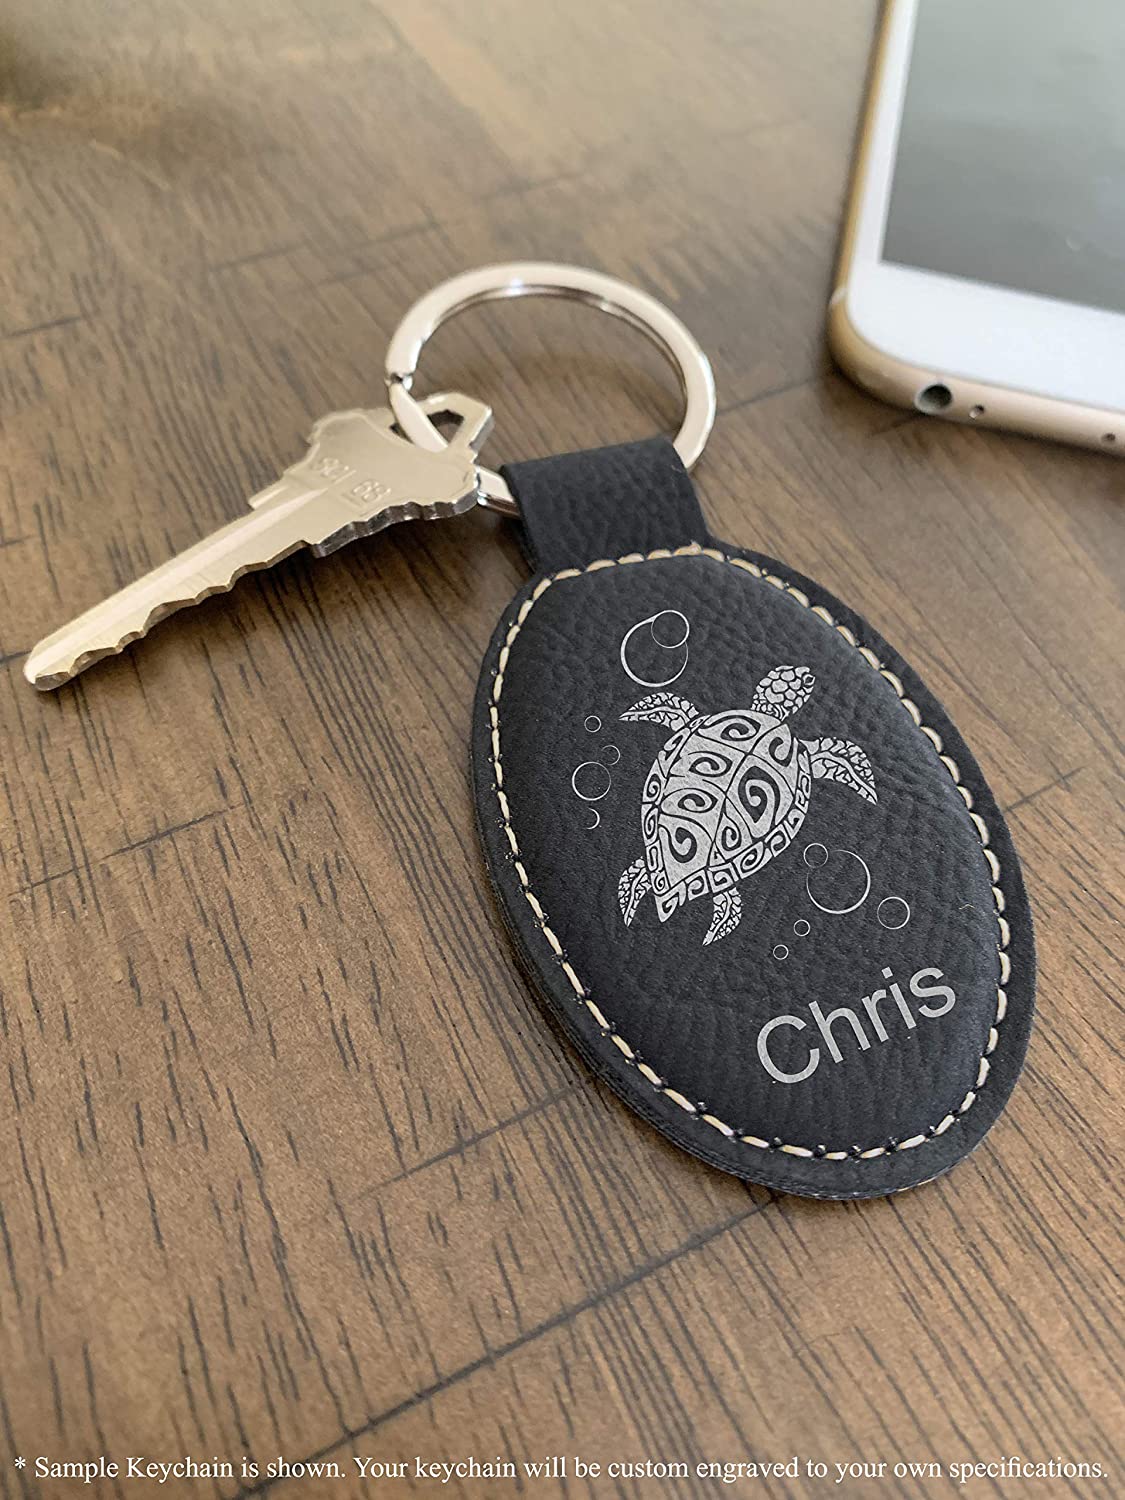 Faux Leather Oval Keychain, Barber Shop Pole, Personalized Engraving Included